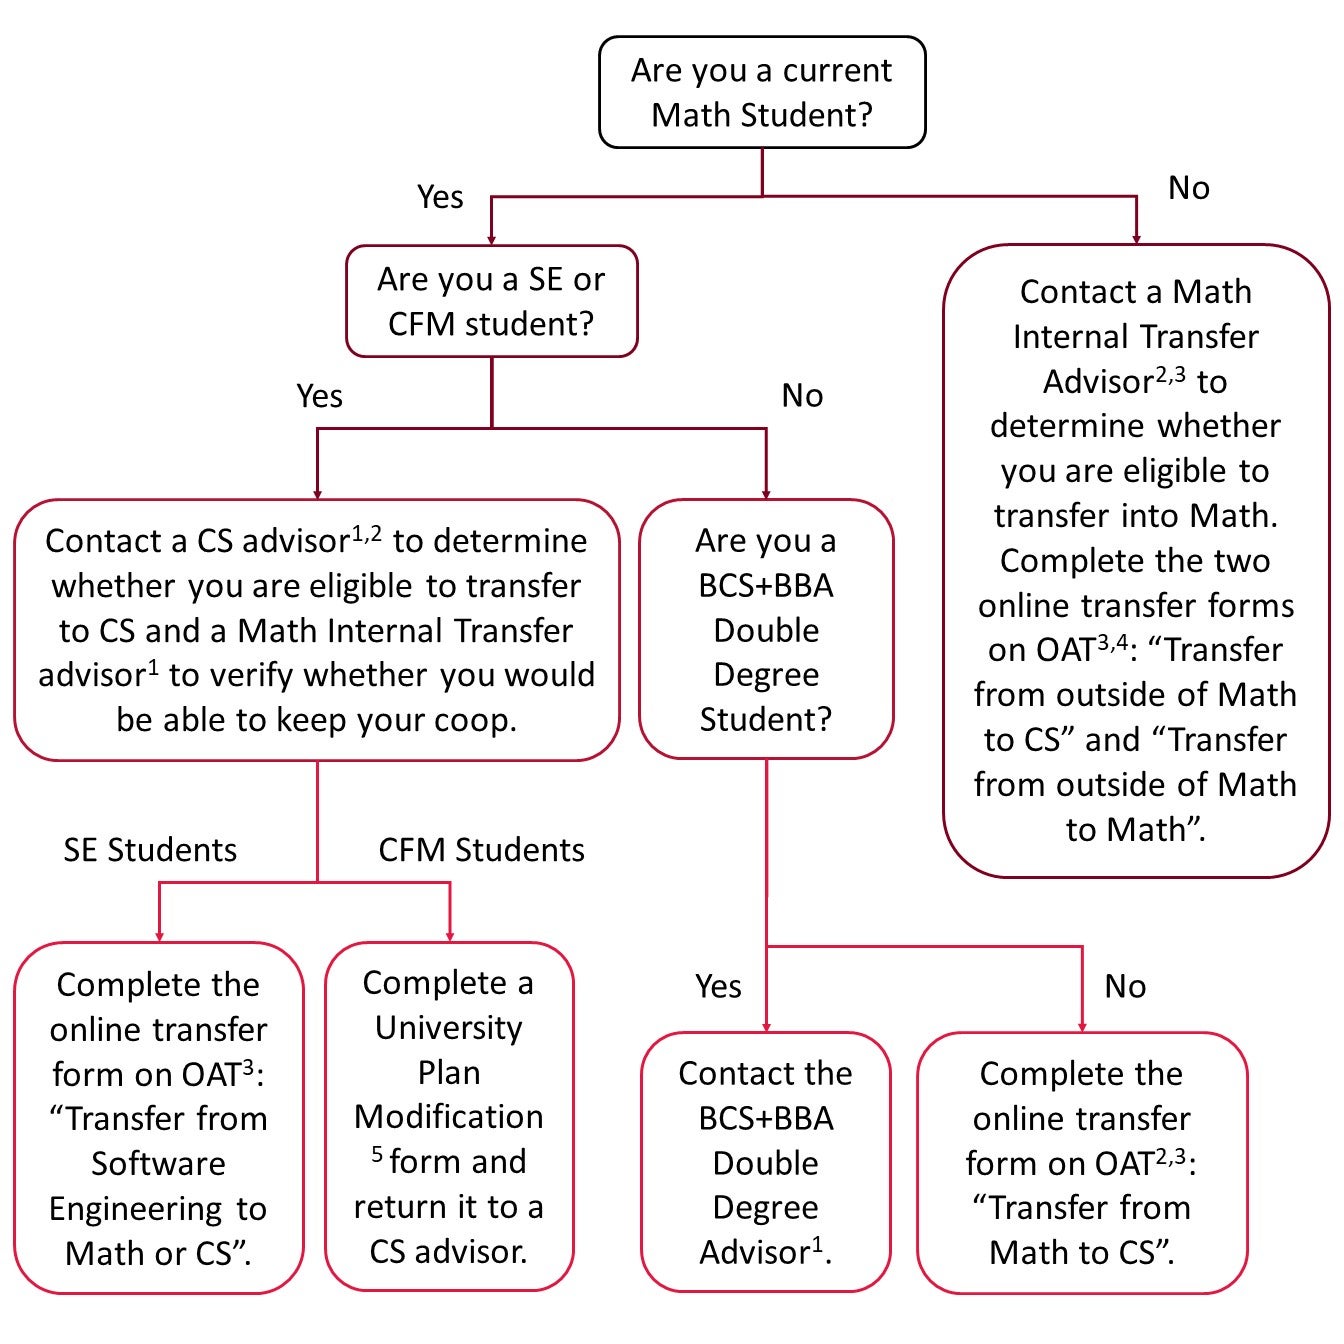 Transfer processes for math and non-math students, and who they should contact for more information.